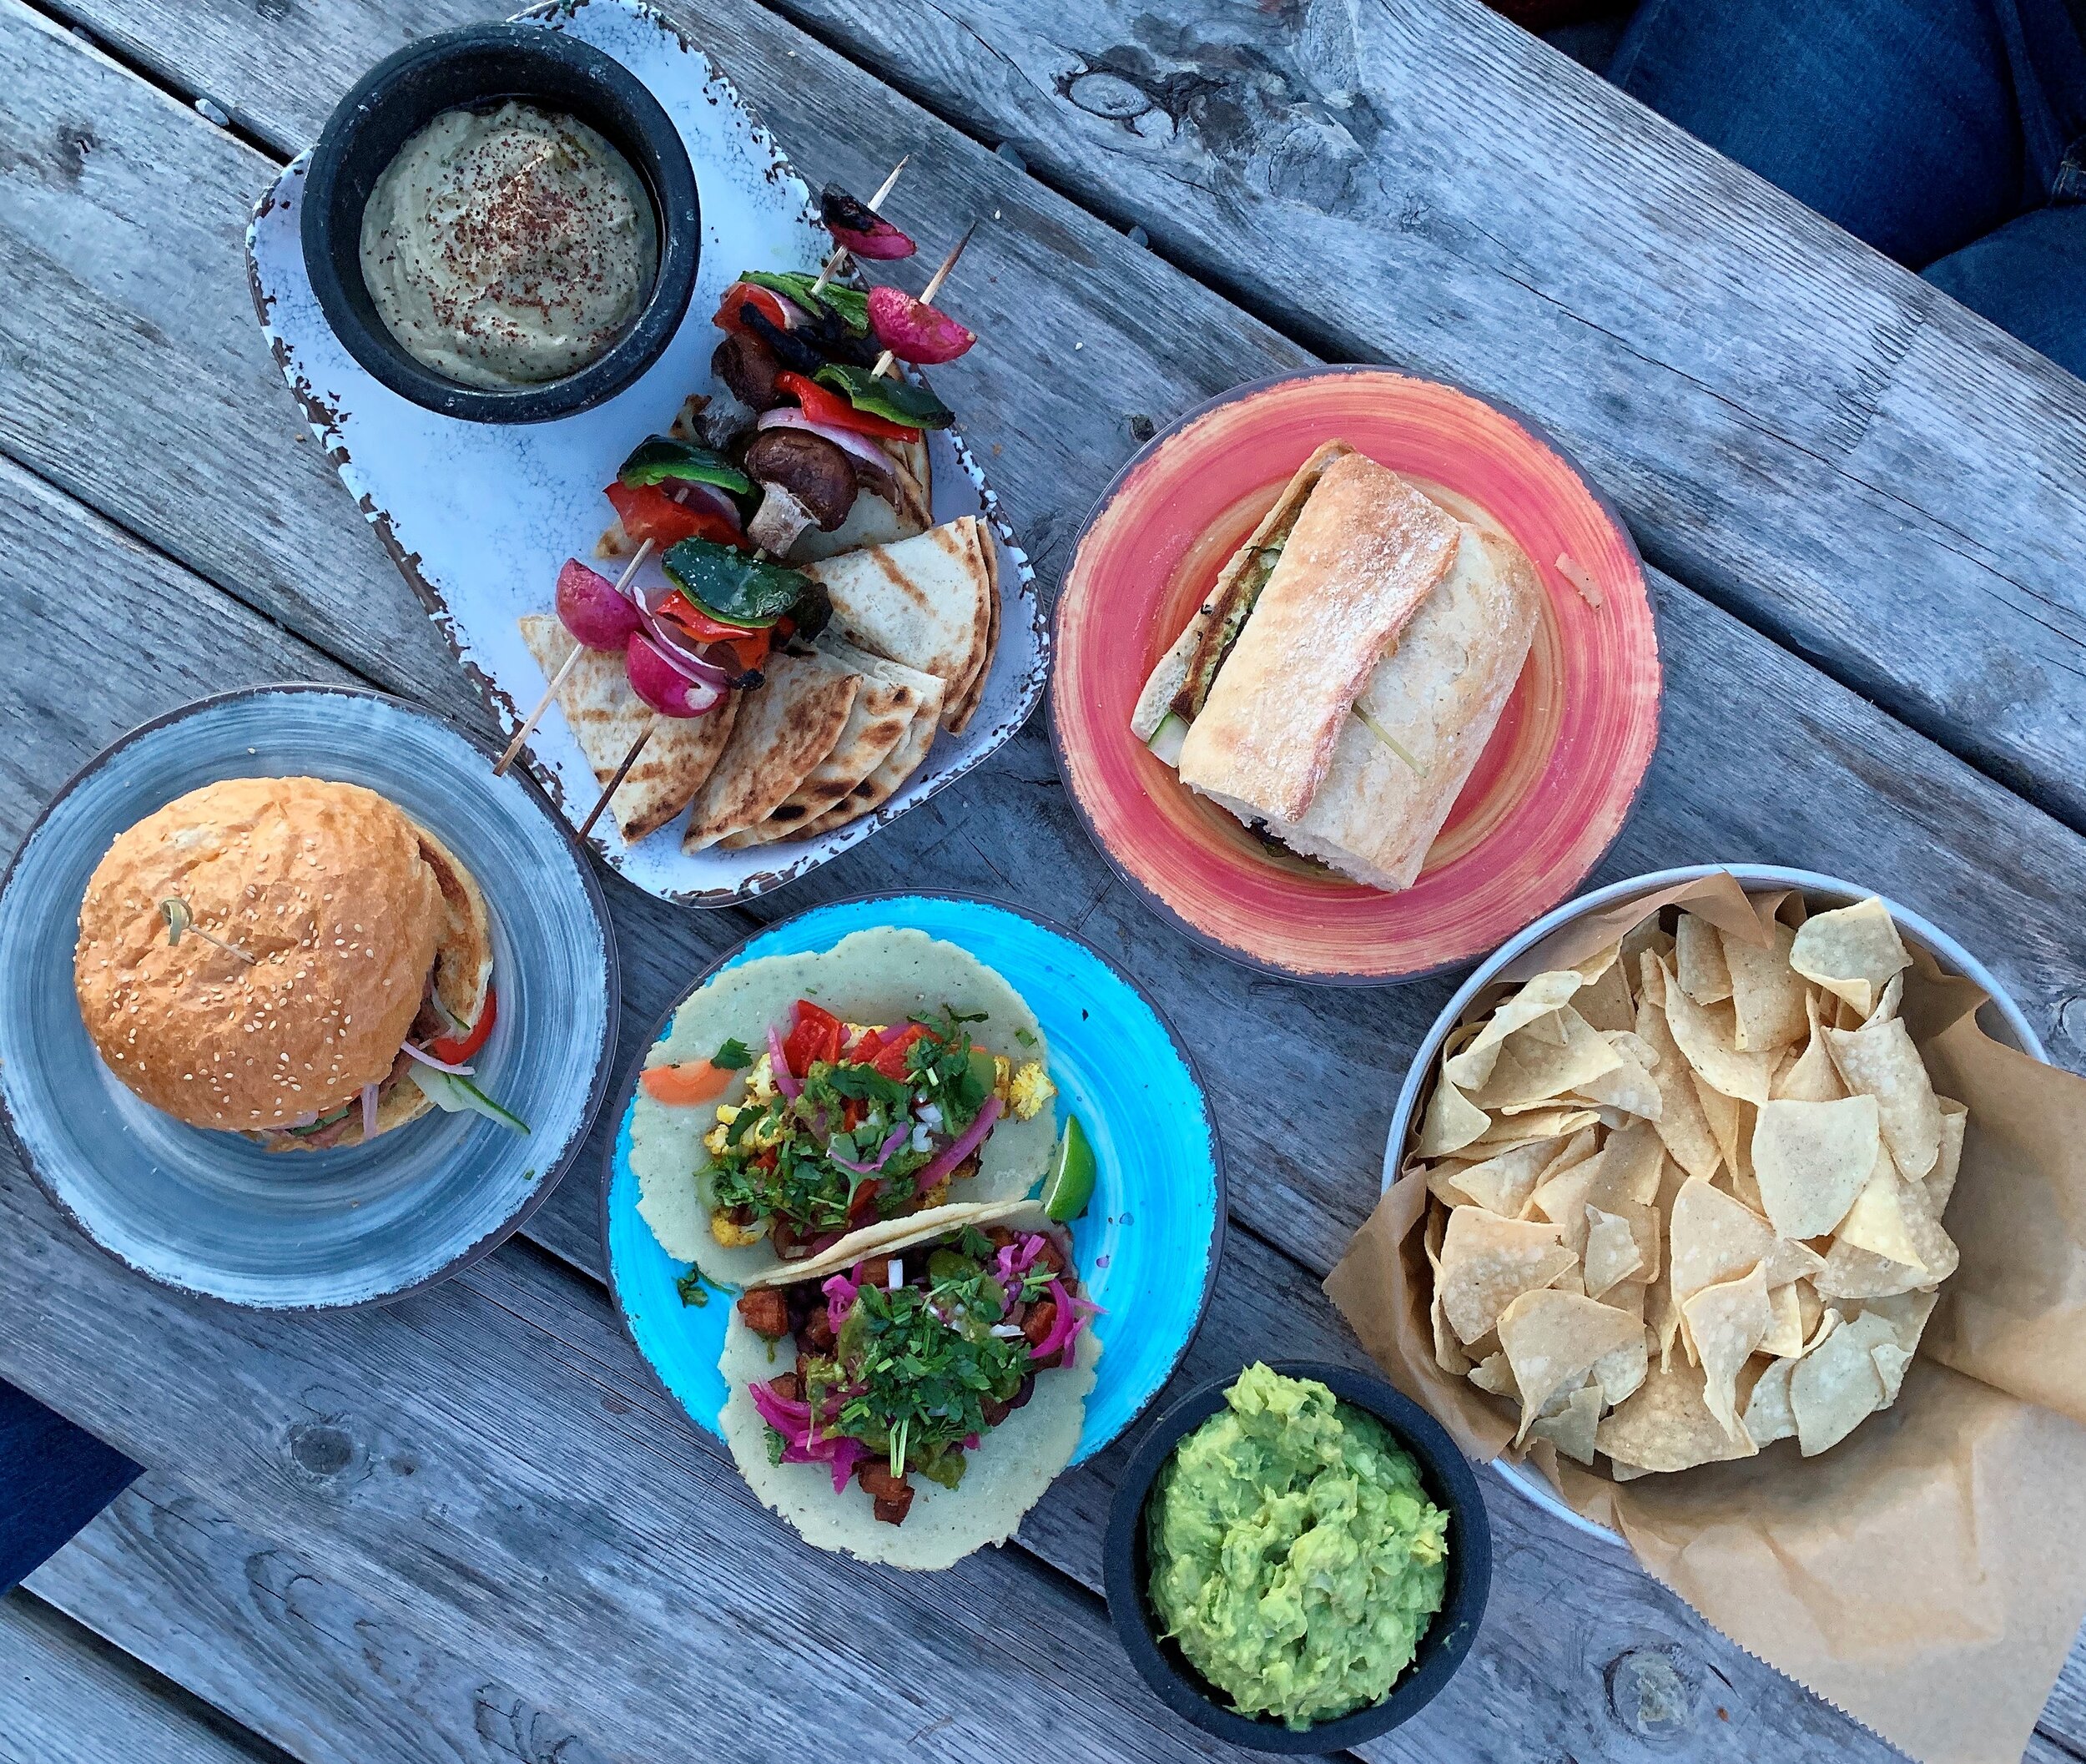 A picnic table full of vegan food including banh mi, tacos, guacamole, and vegetable skewers